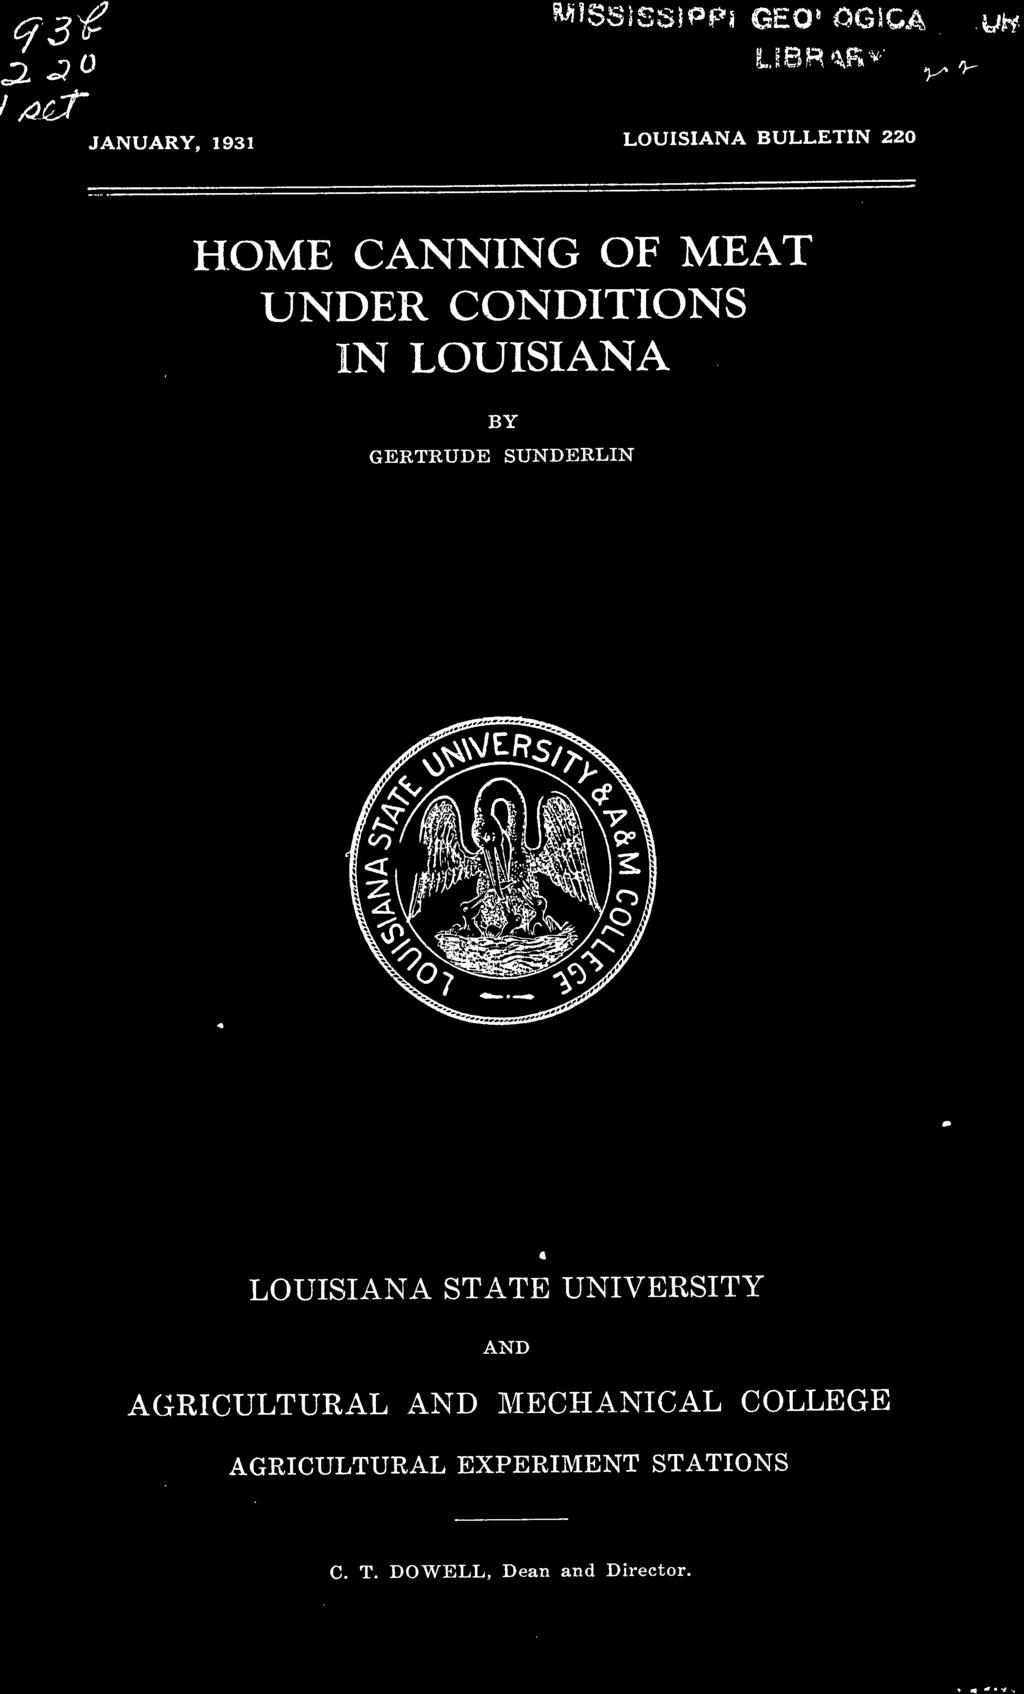 SUNDERLIN LOUISIANA STATE UNIVERSITY AND AGRICULTURAL AND MECHANICAL